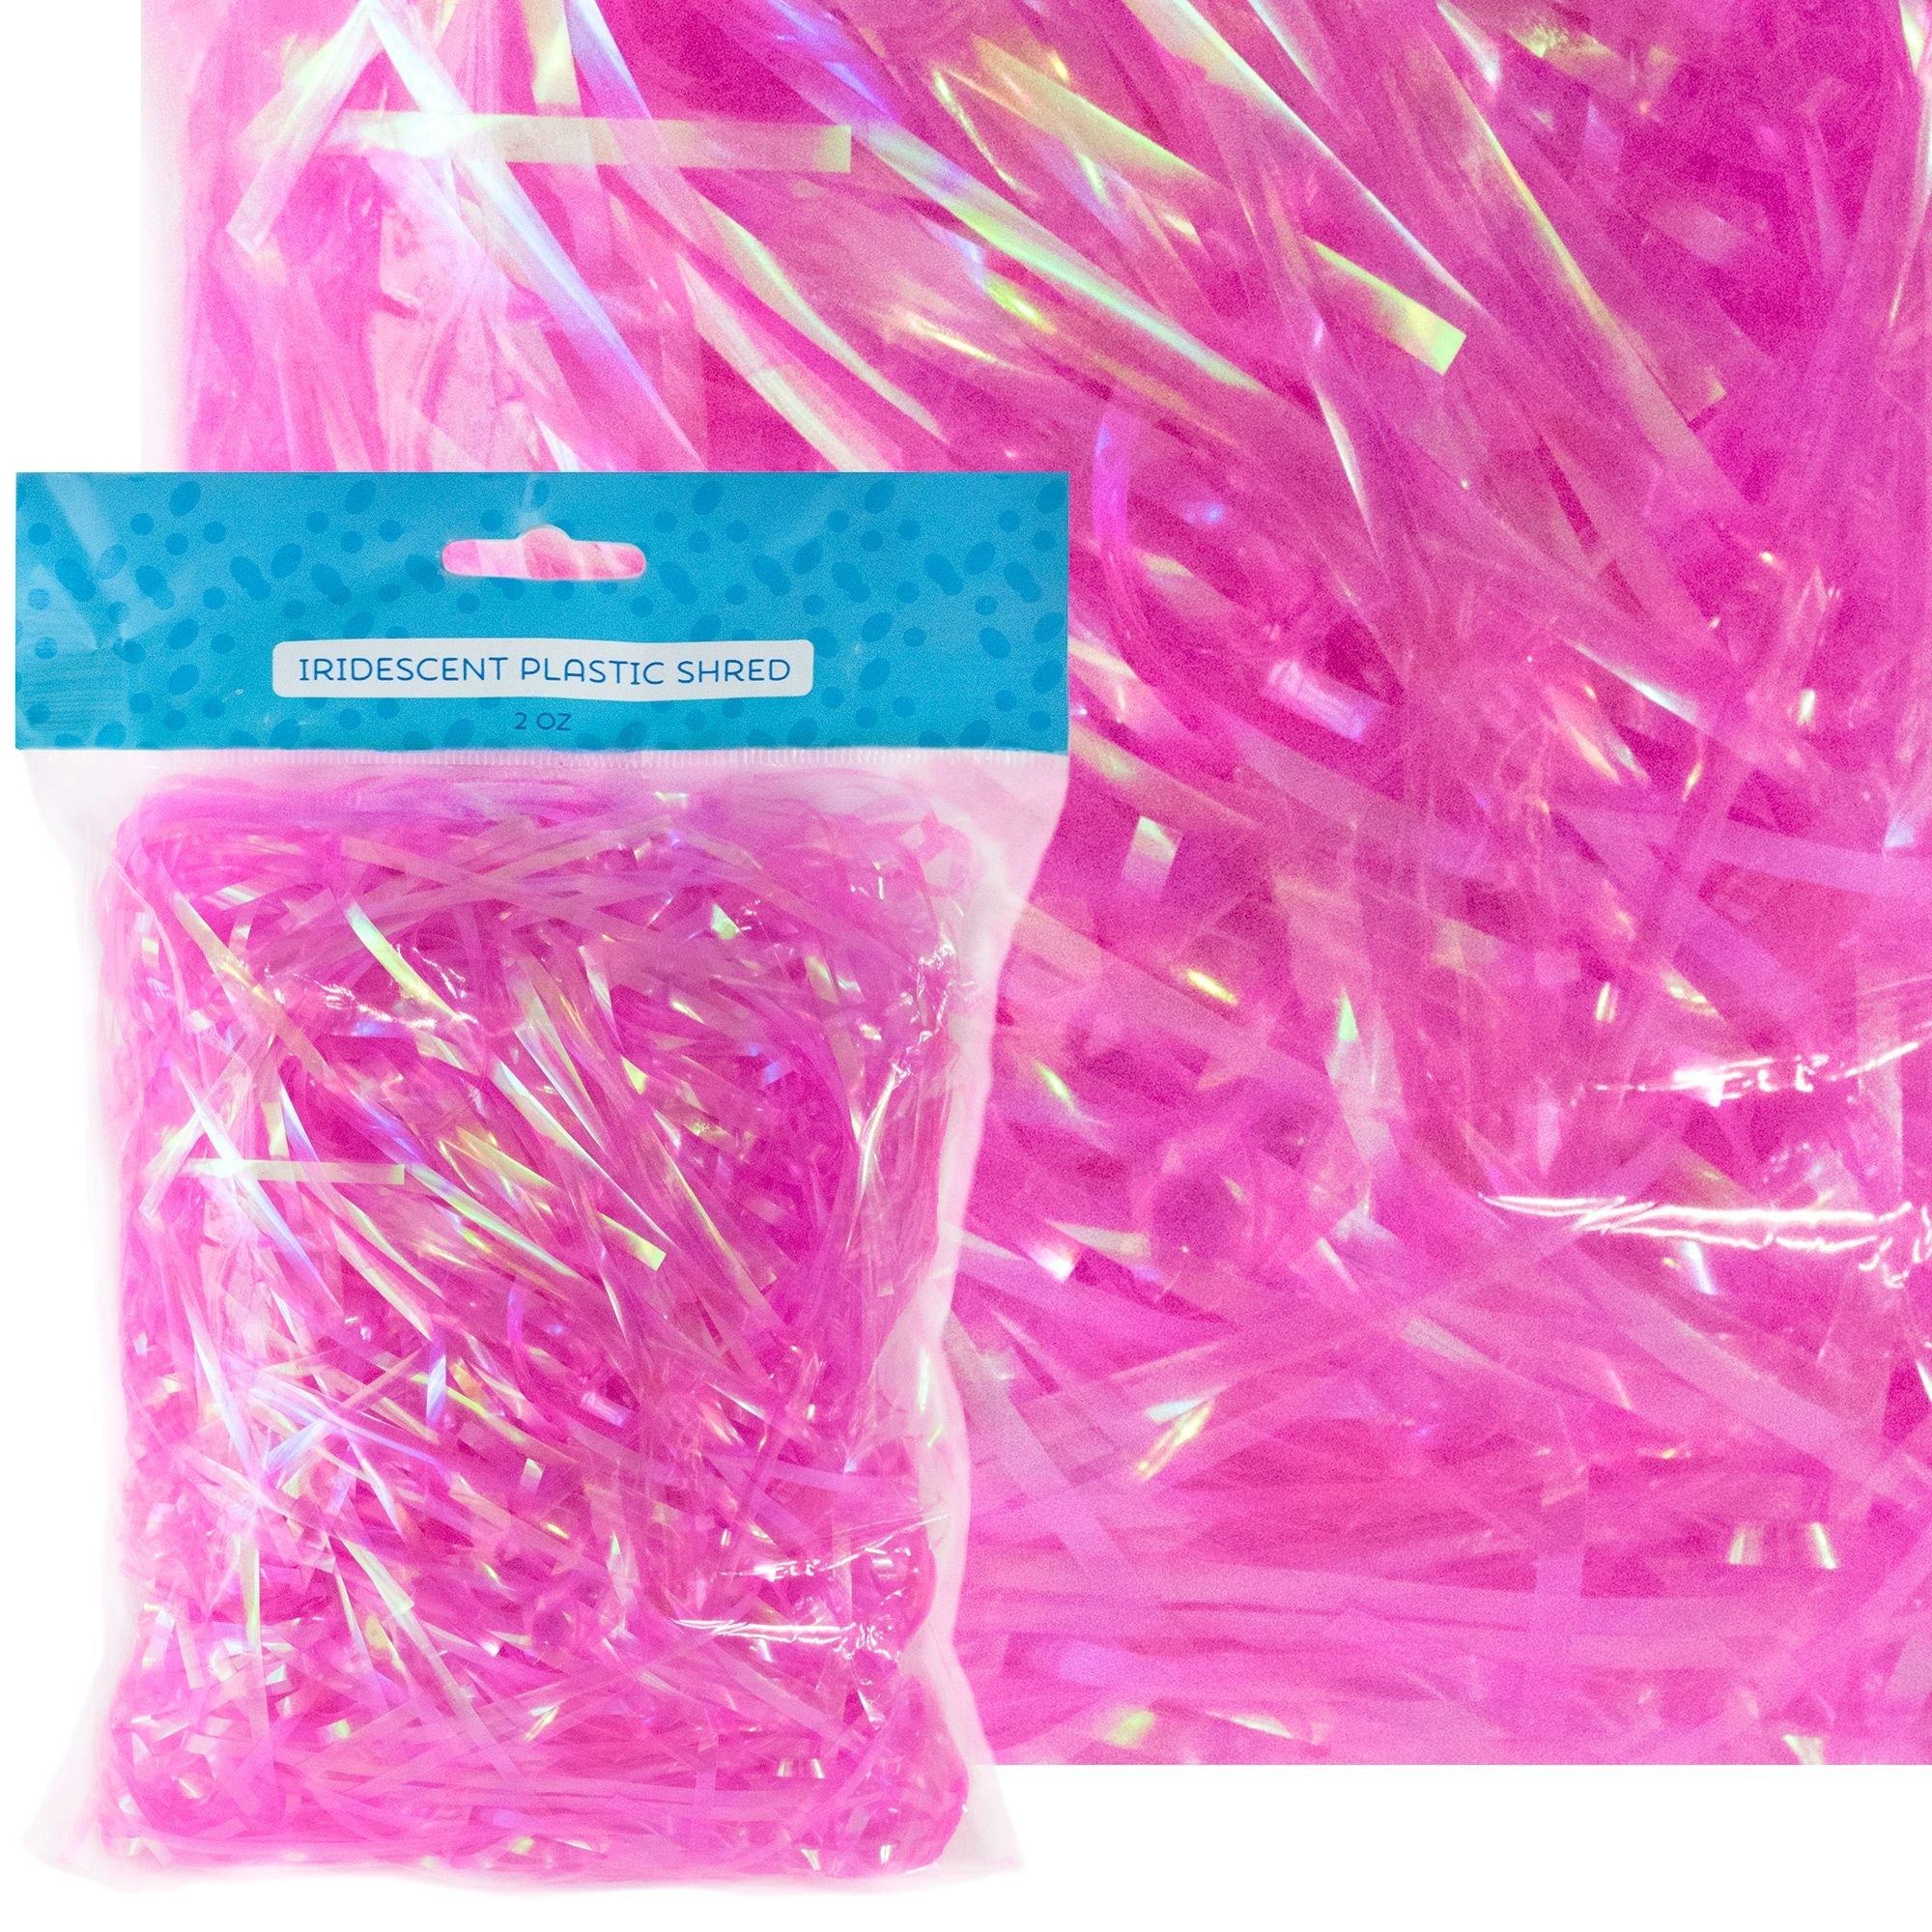 JOYIN 1000g (36oz ) Multicolor Rainbow Easter Grass Recyclable Paper Shred Pastel Colors (Pink, Yellow, Sky Blue, and Green) for Easter Hunt/ Decor